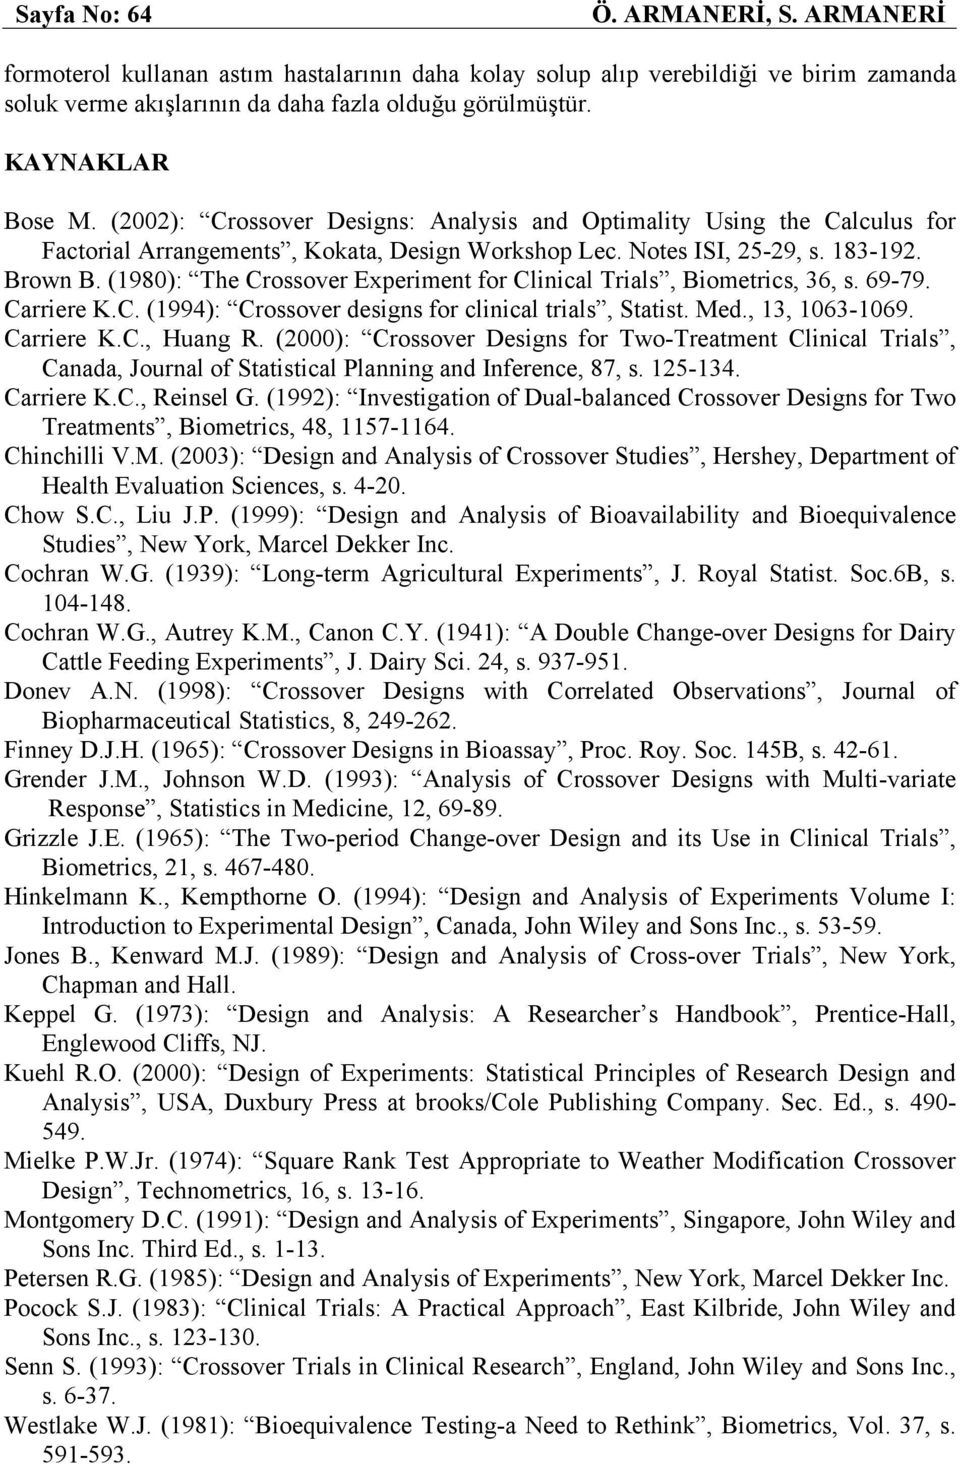 Biometrics, 36, s 6979 Carriere KC (994): Crossover esigns for clinical trials, Statist Me, 3, 063069 Carriere KC, Huang R (000): Crossover Designs for TwoTreatment Clinical Trials, Canaa, Journal of